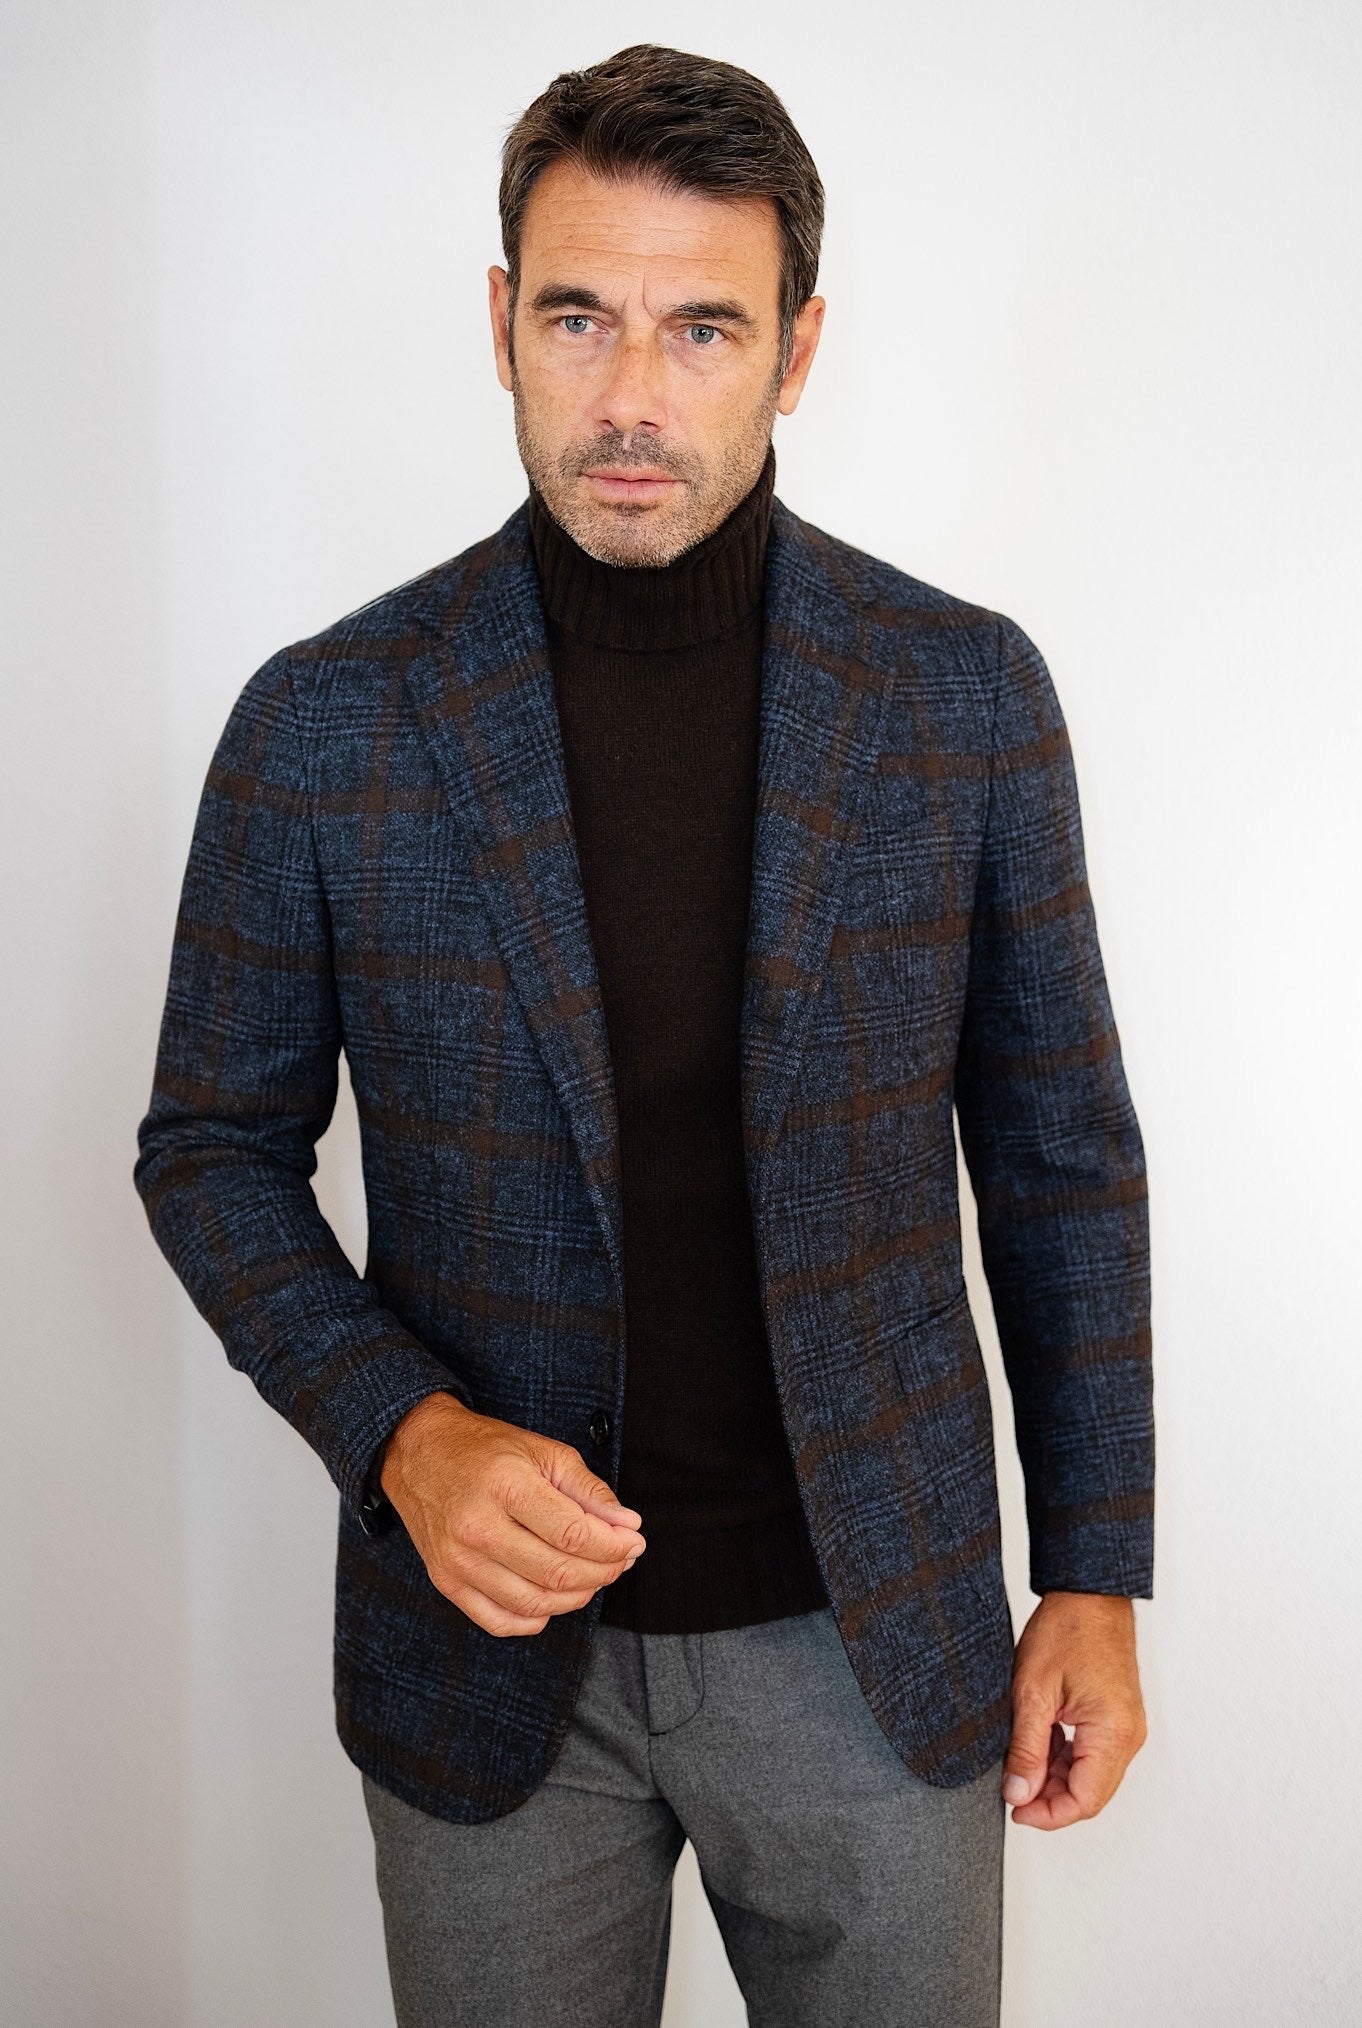 LATIN STYLE Blue and Brown Wales Alpaca and Cotton Jacket